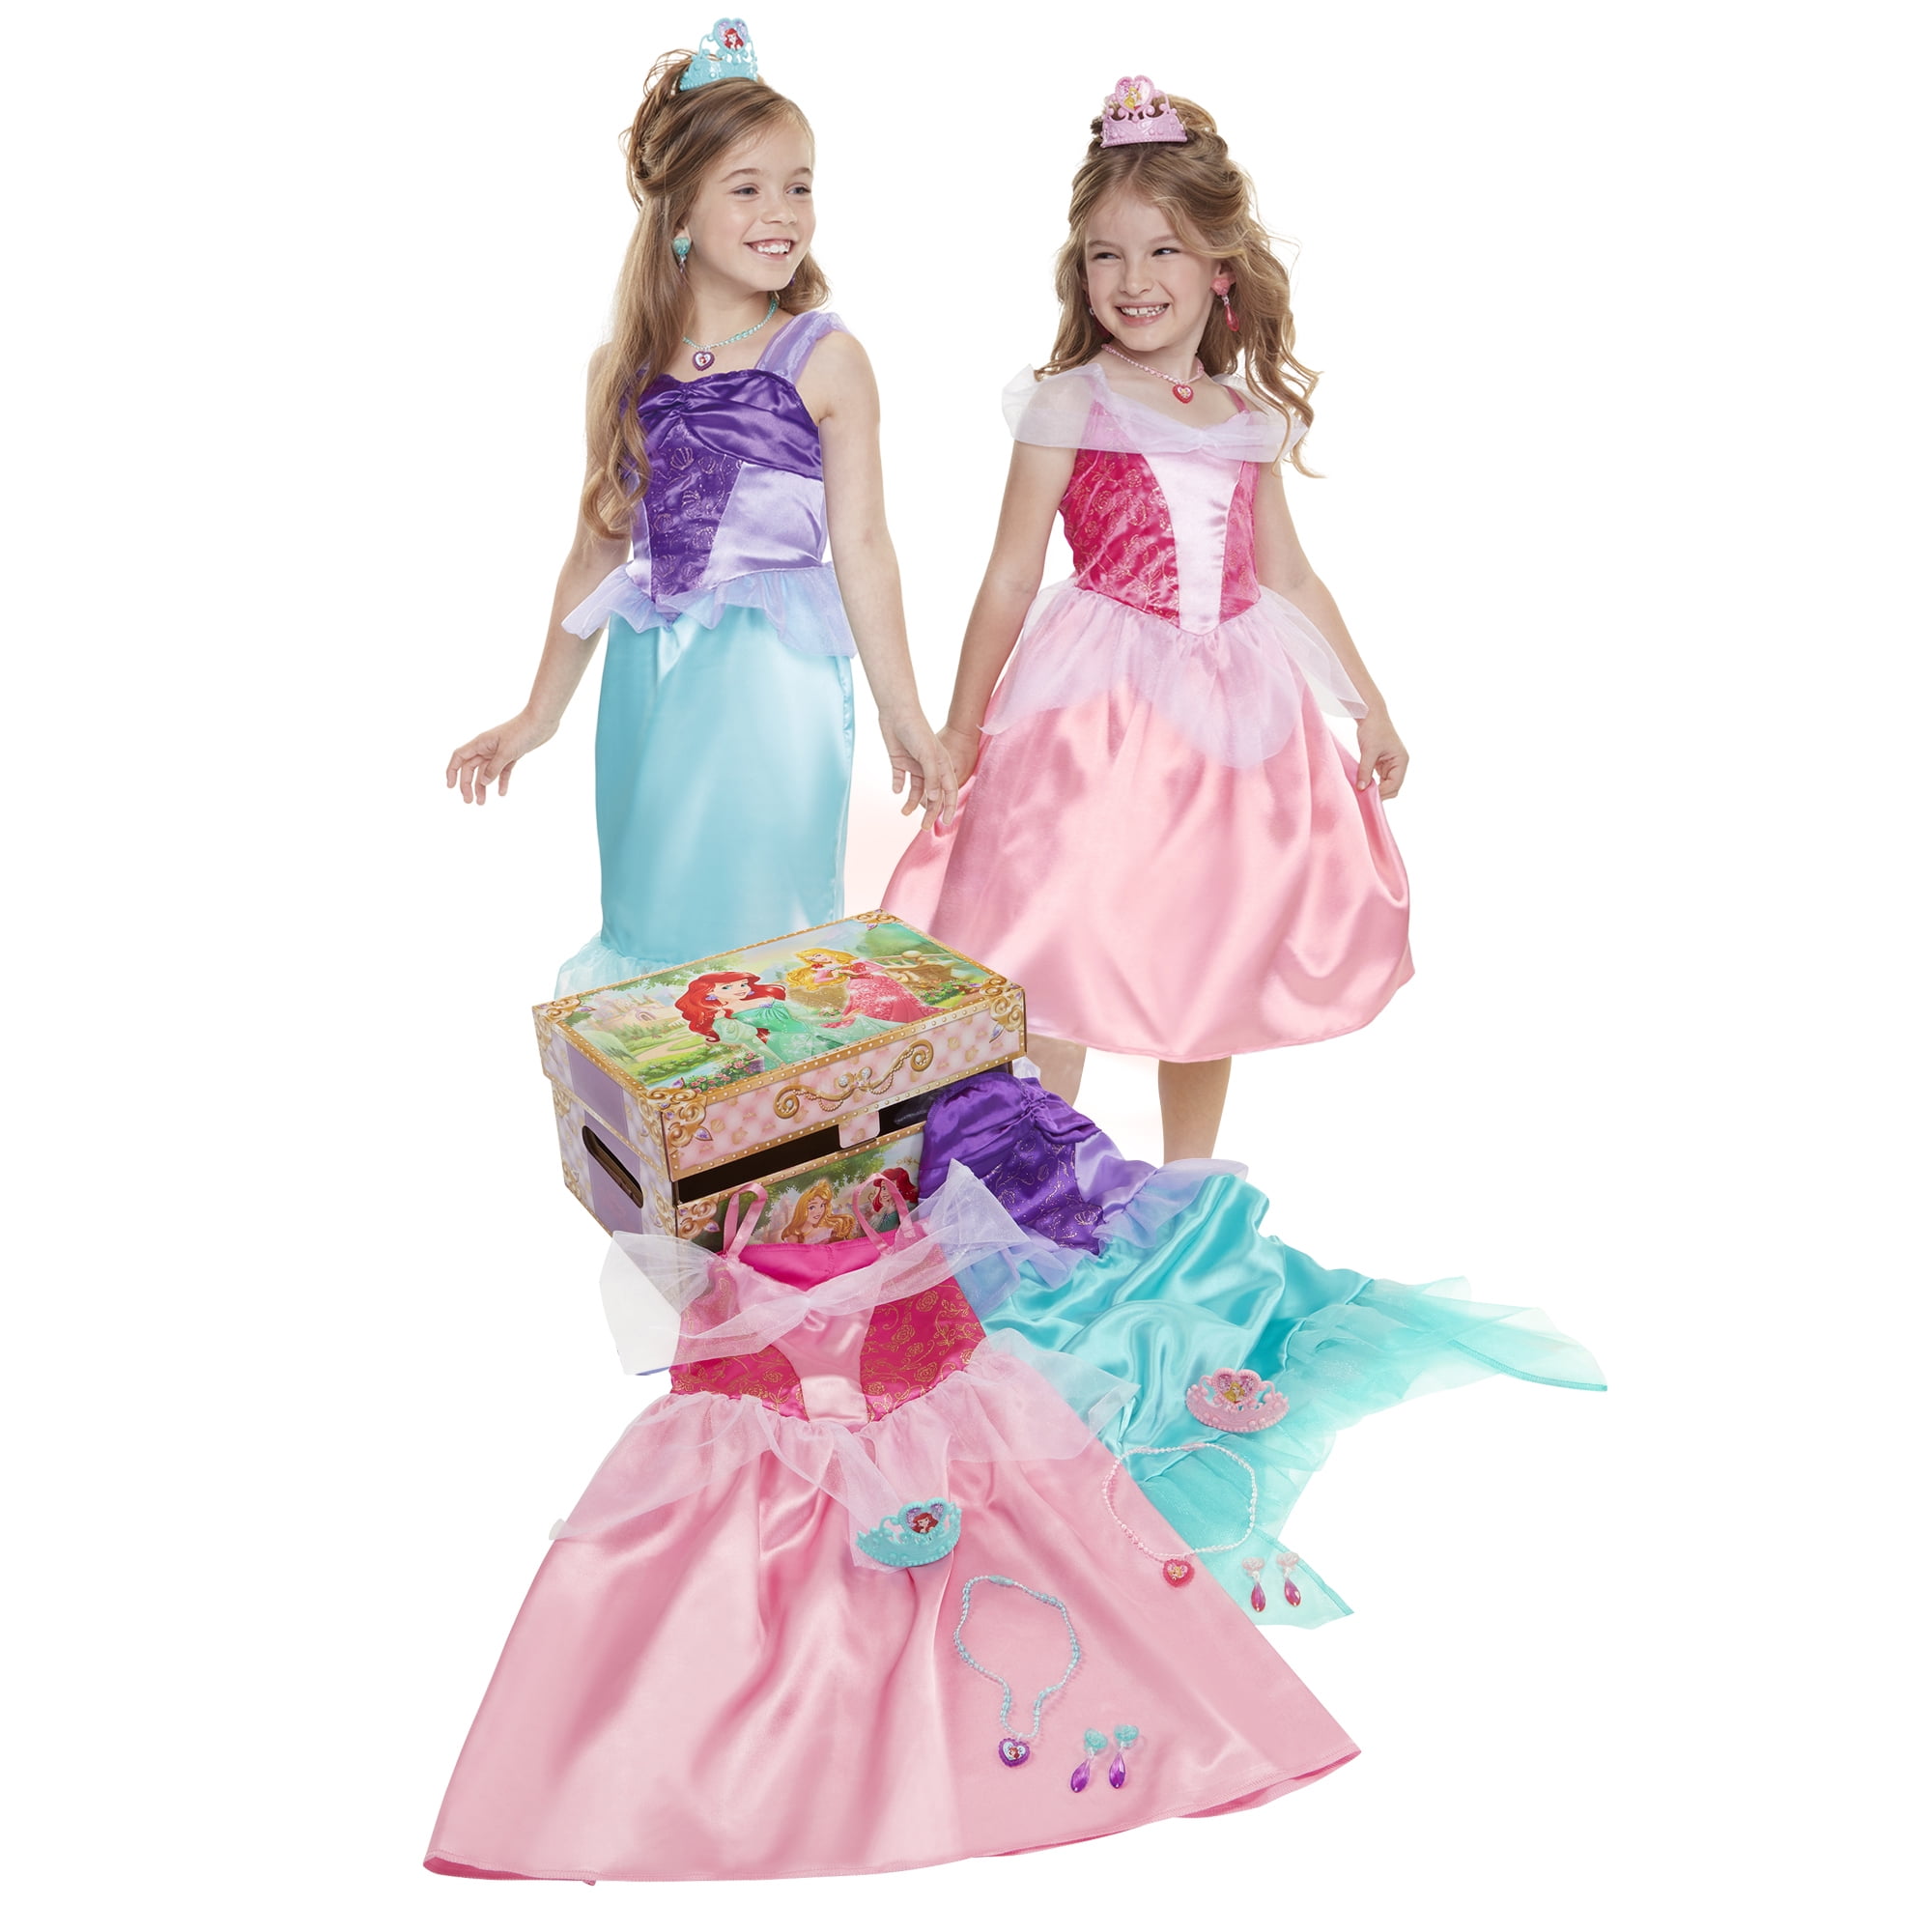 BIBUTY Pretend Play Costumes Princess Dresses for Girls Dress Up Clothes Trunk 